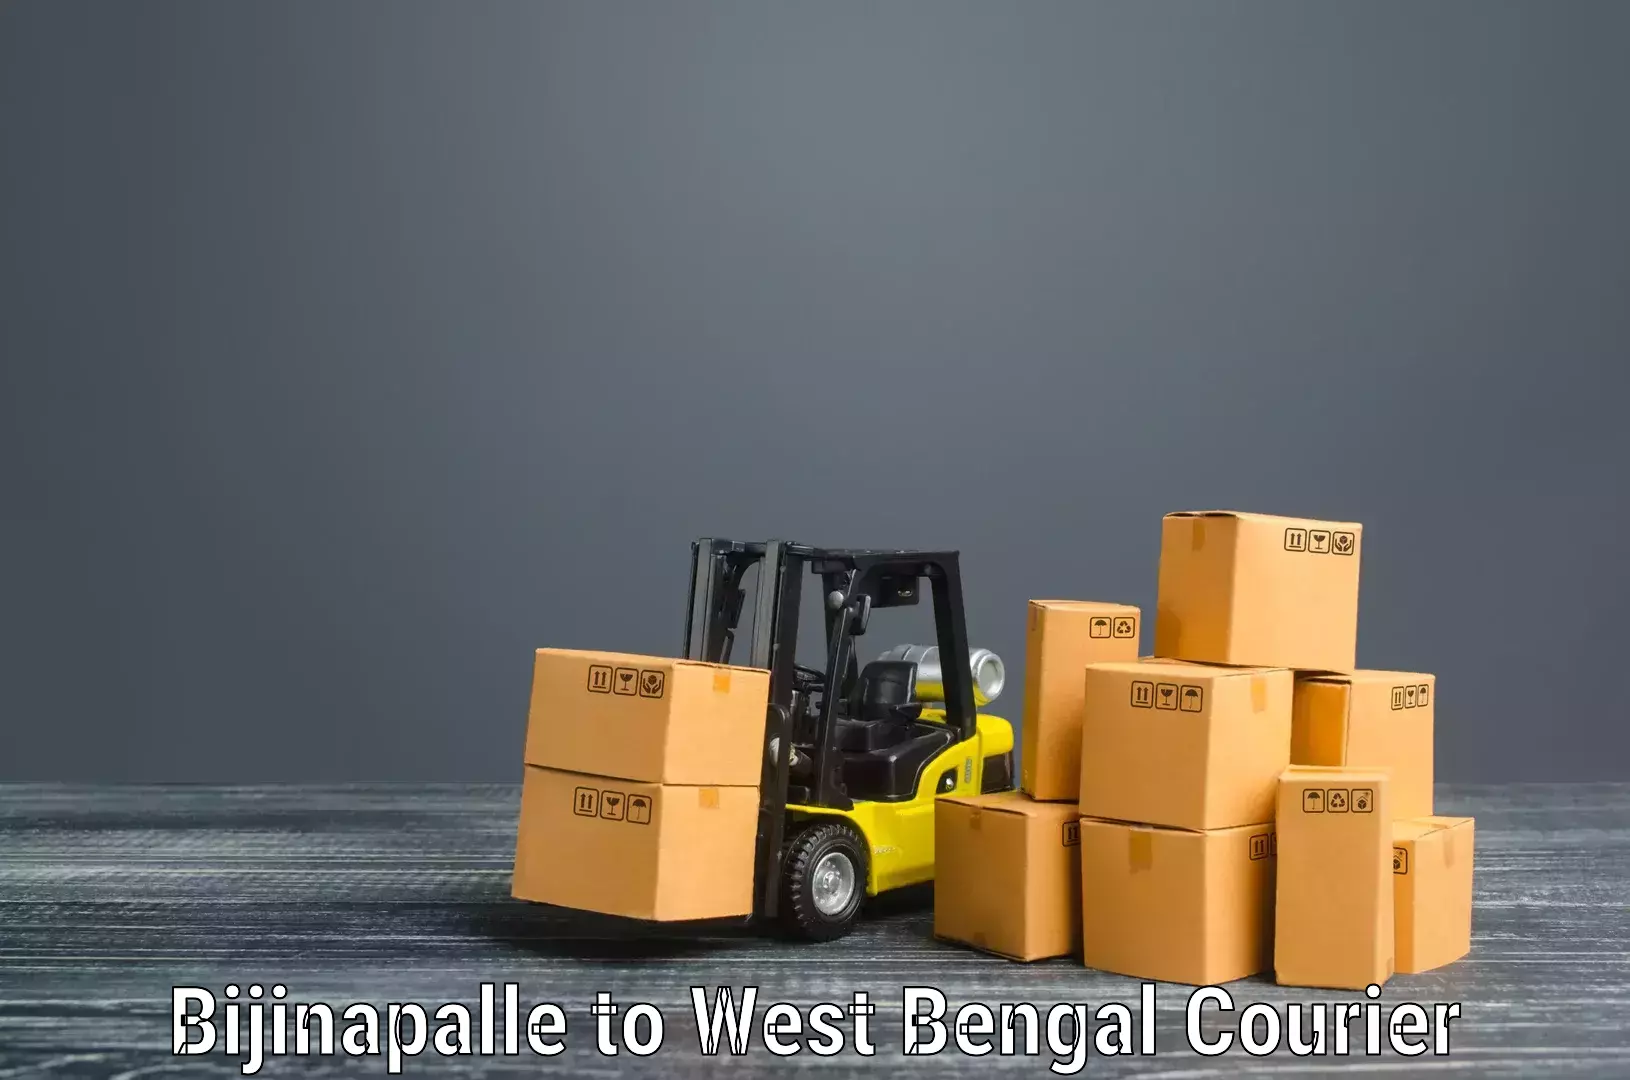 Furniture transport experts in Bijinapalle to Lalgola